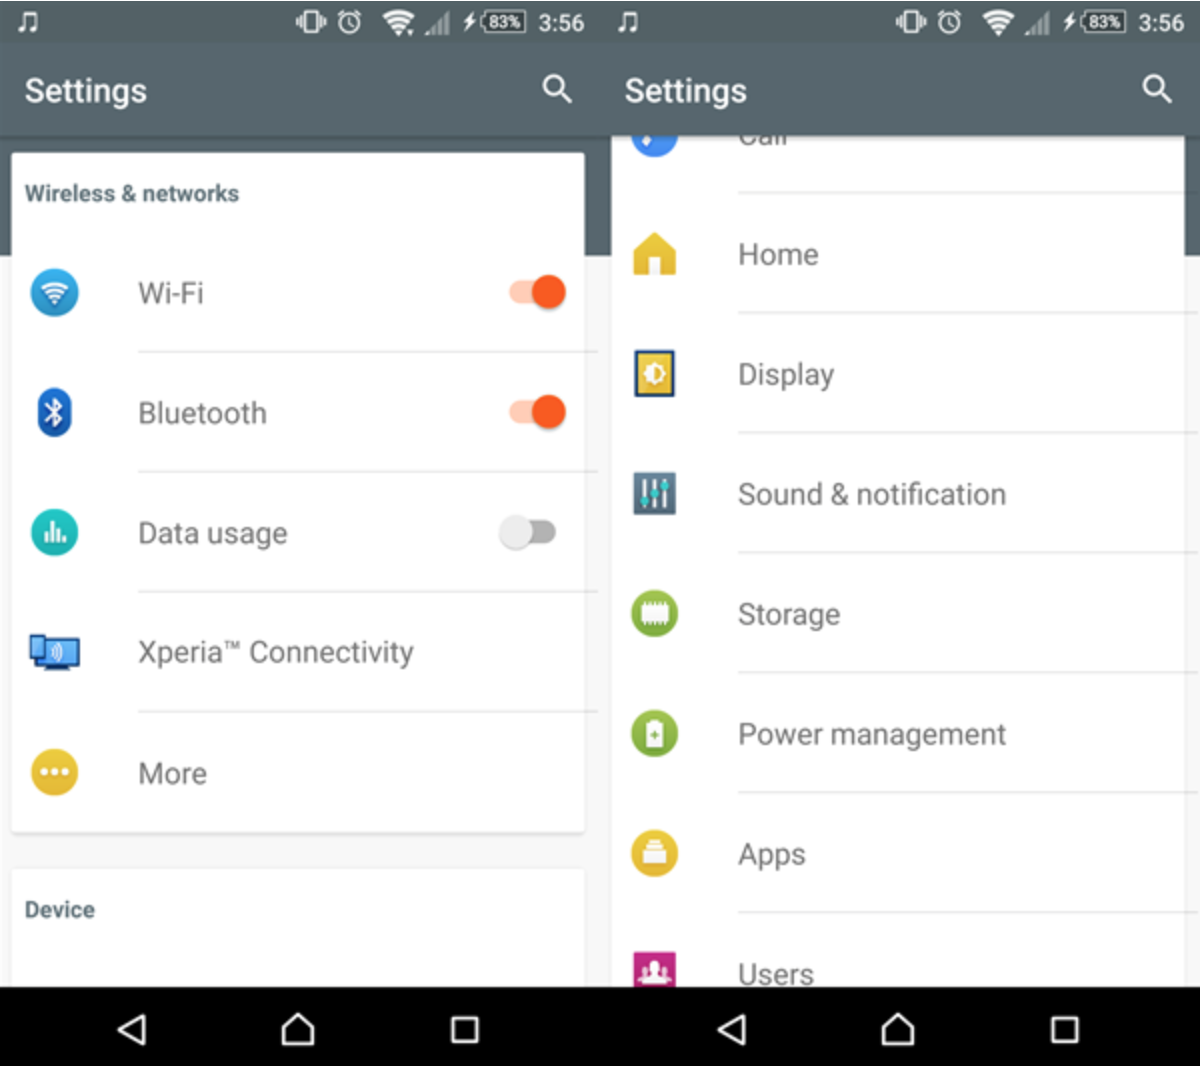  Xperia X Settings from Marshmallow